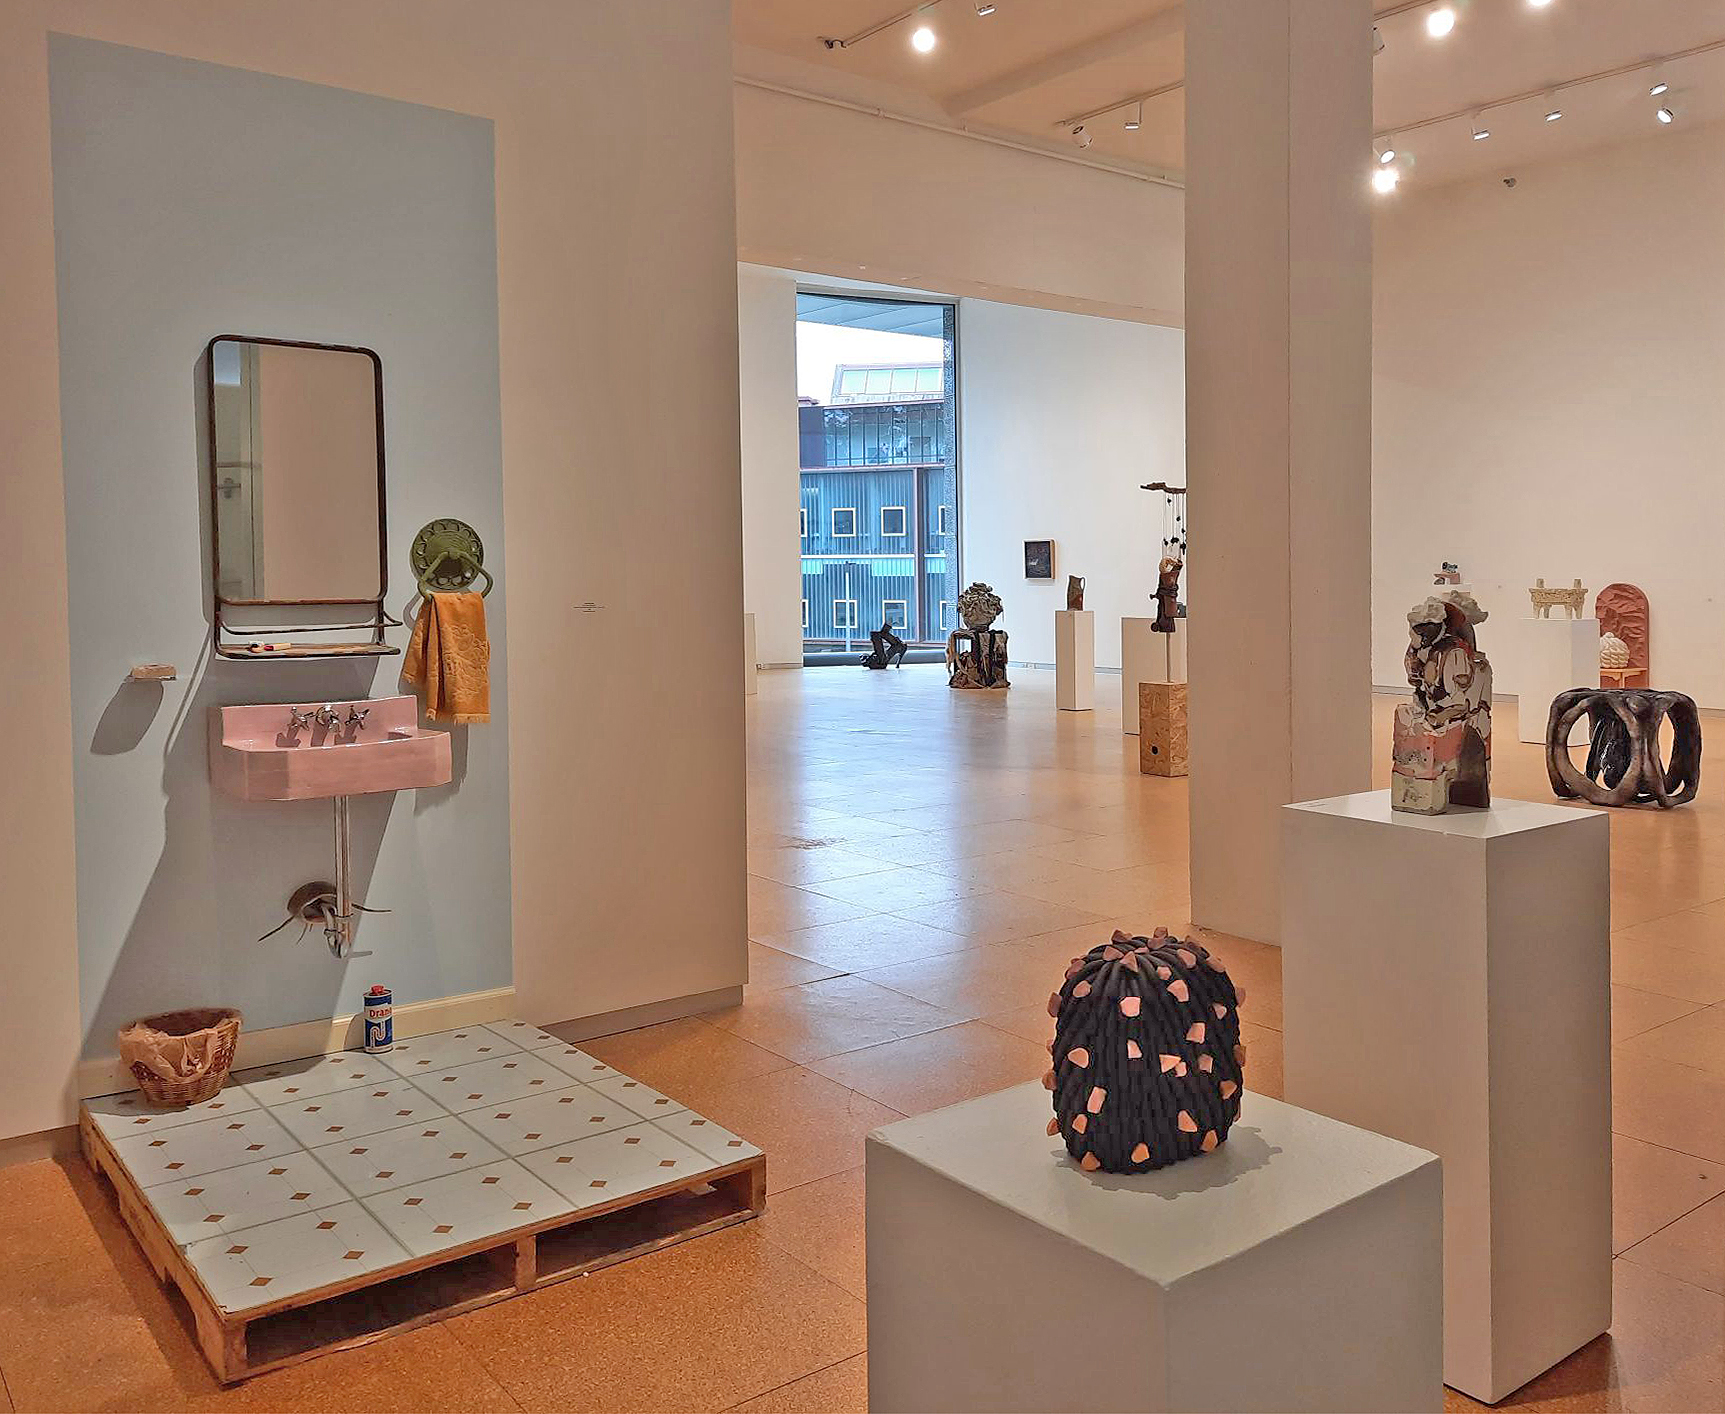 installation view of ceramics invitational show, cork floors, white walls, ceramics pieces from across the country